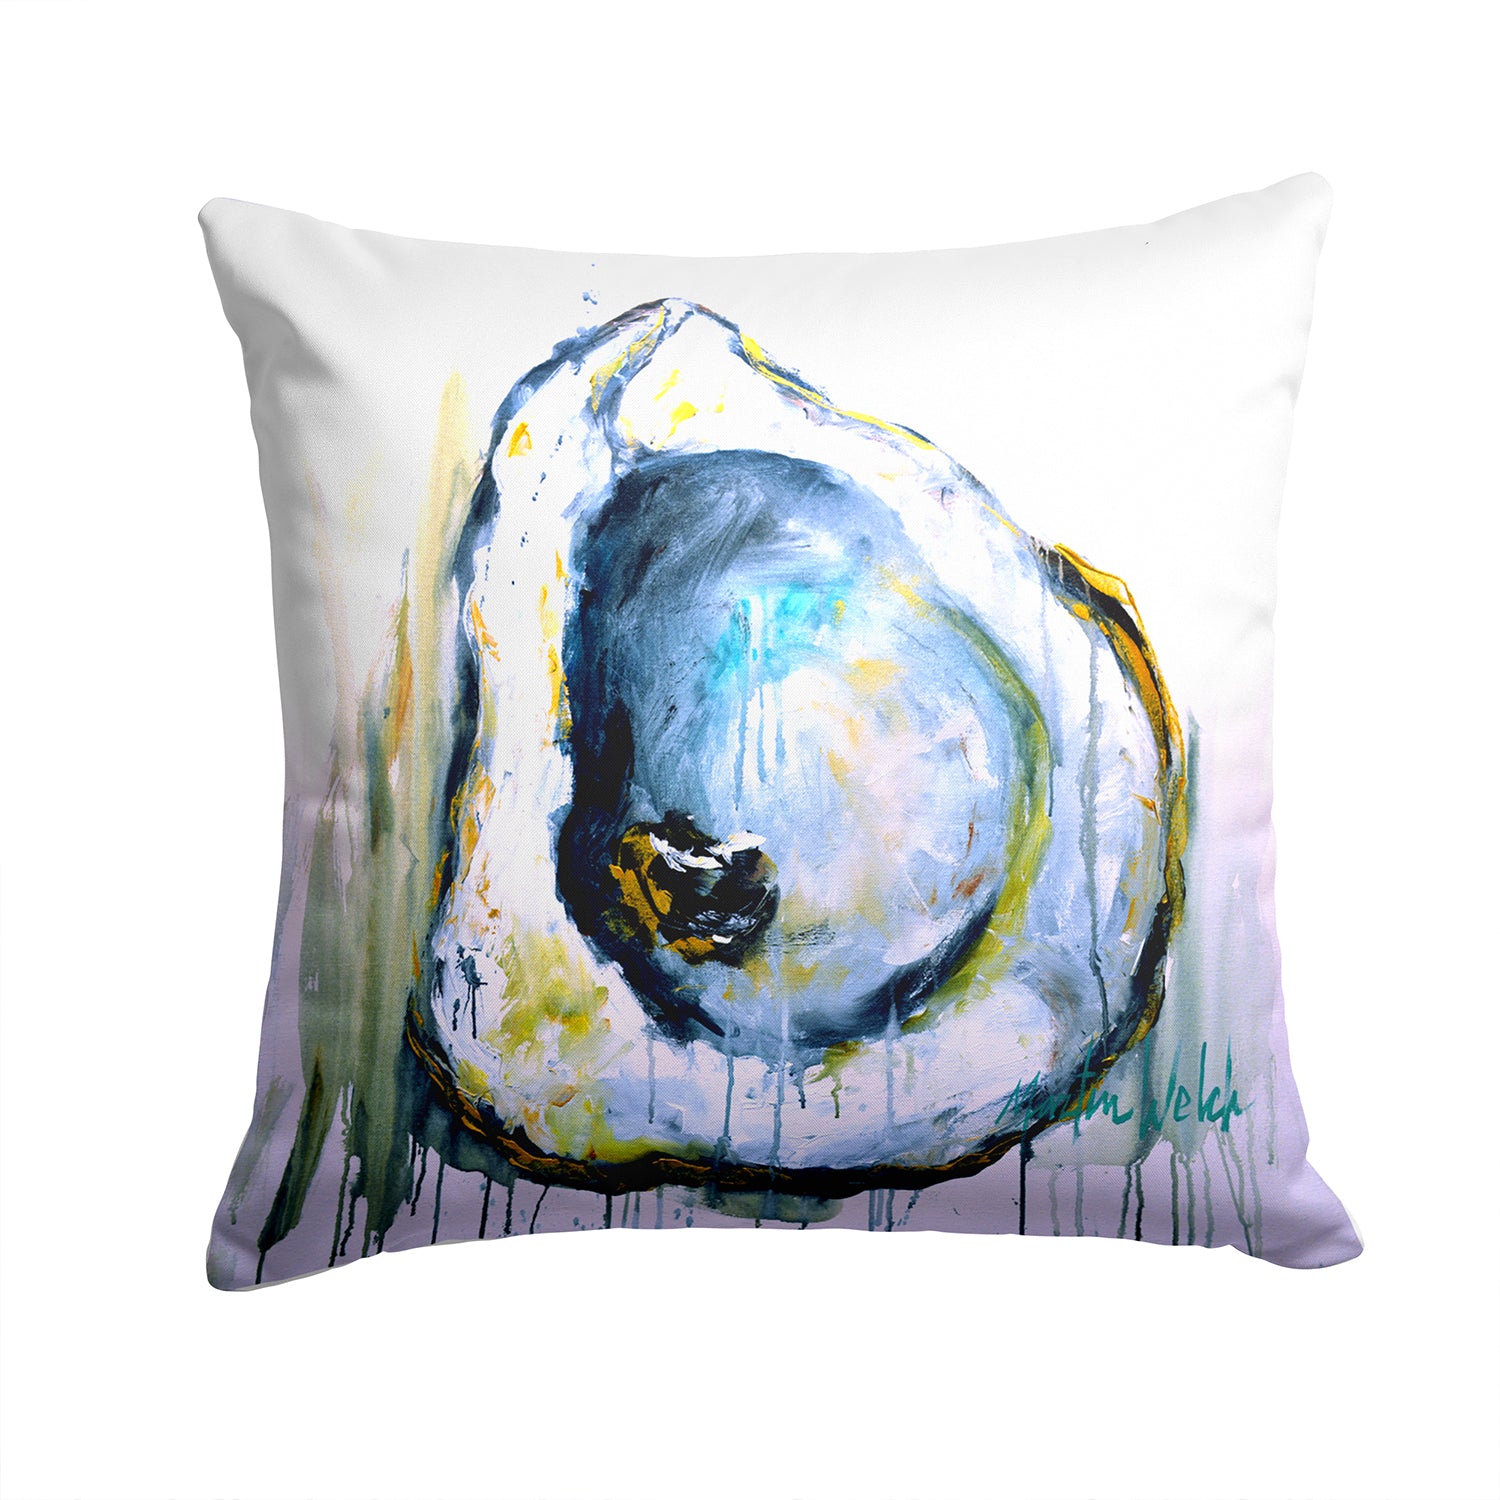 Buy this Aqua Sand Oyster Fabric Decorative Pillow